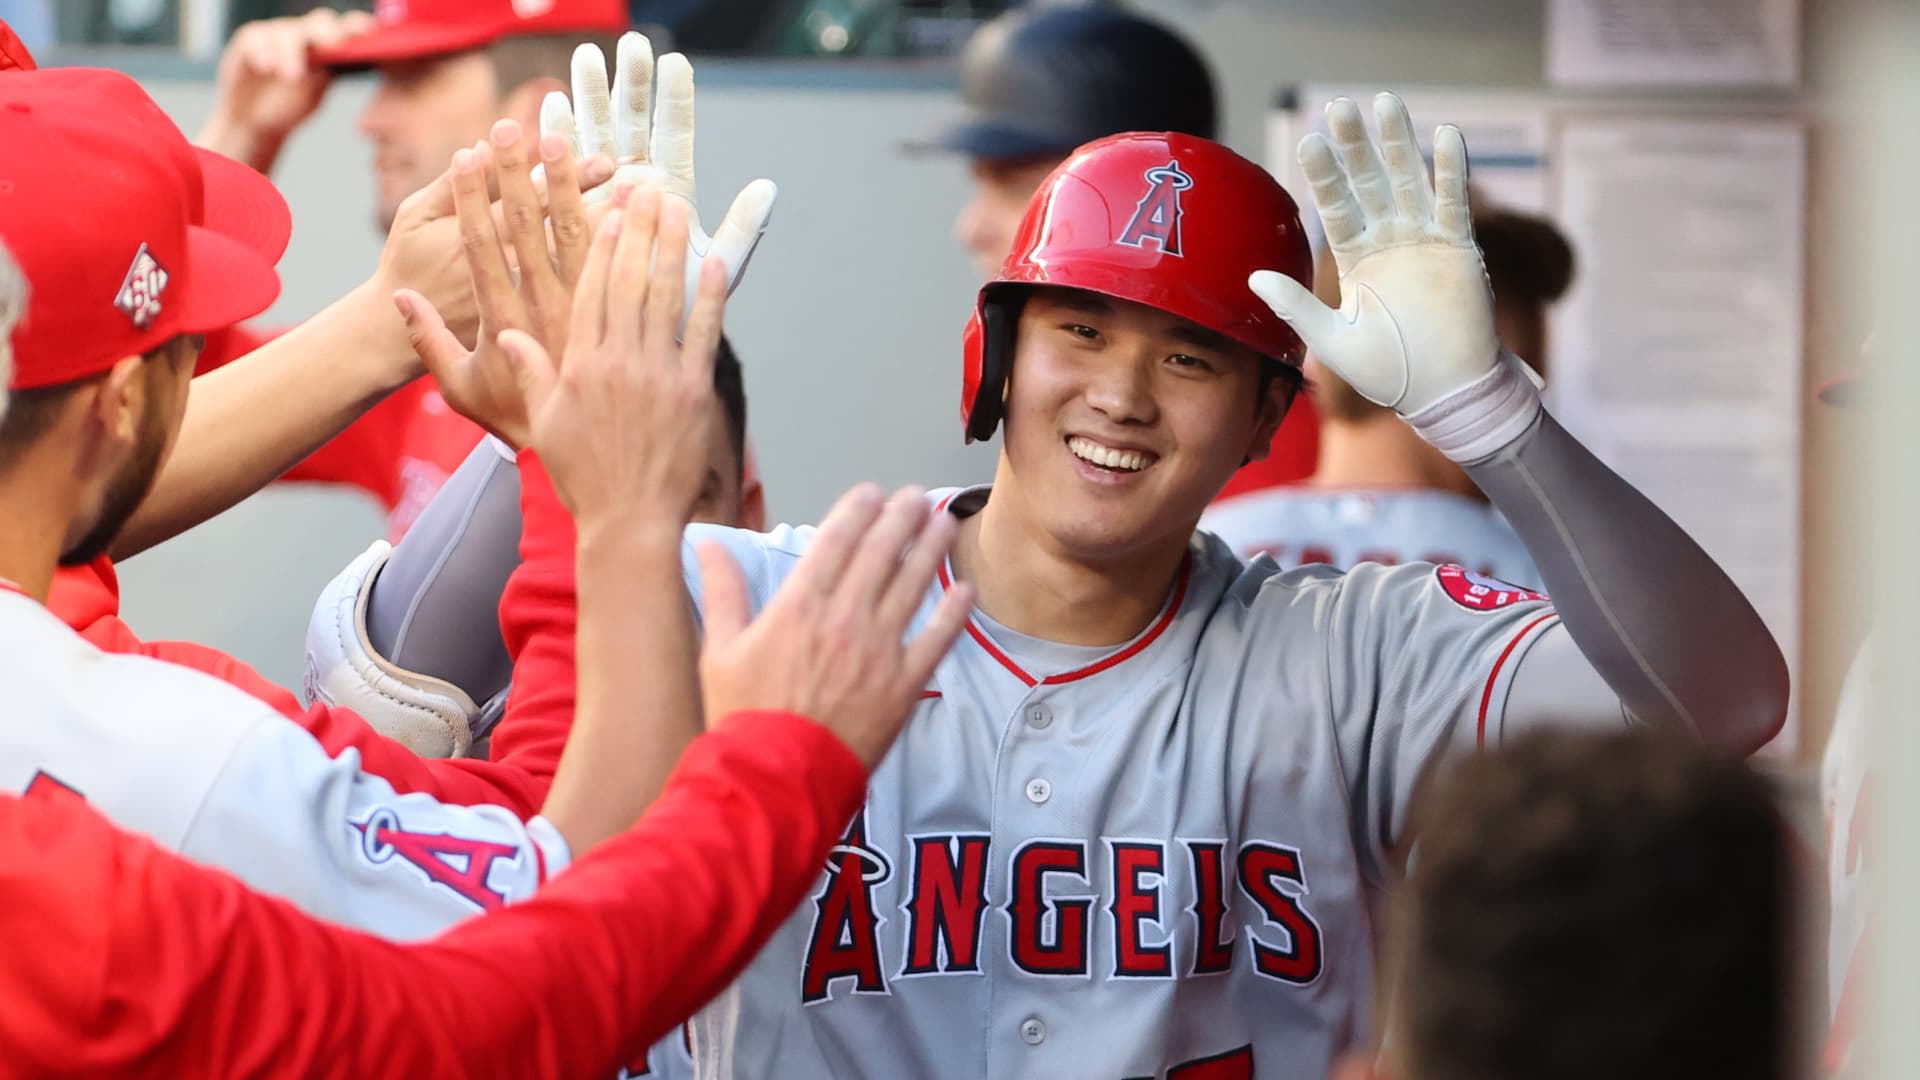 Shohei Ohtani #17 of the Los Angeles Angels celebrates in the dugout after hitting a solo home run during the third inning against the Seattle Mariners at T-Mobile Park on July 09, 2021 in Seattle, Washington.